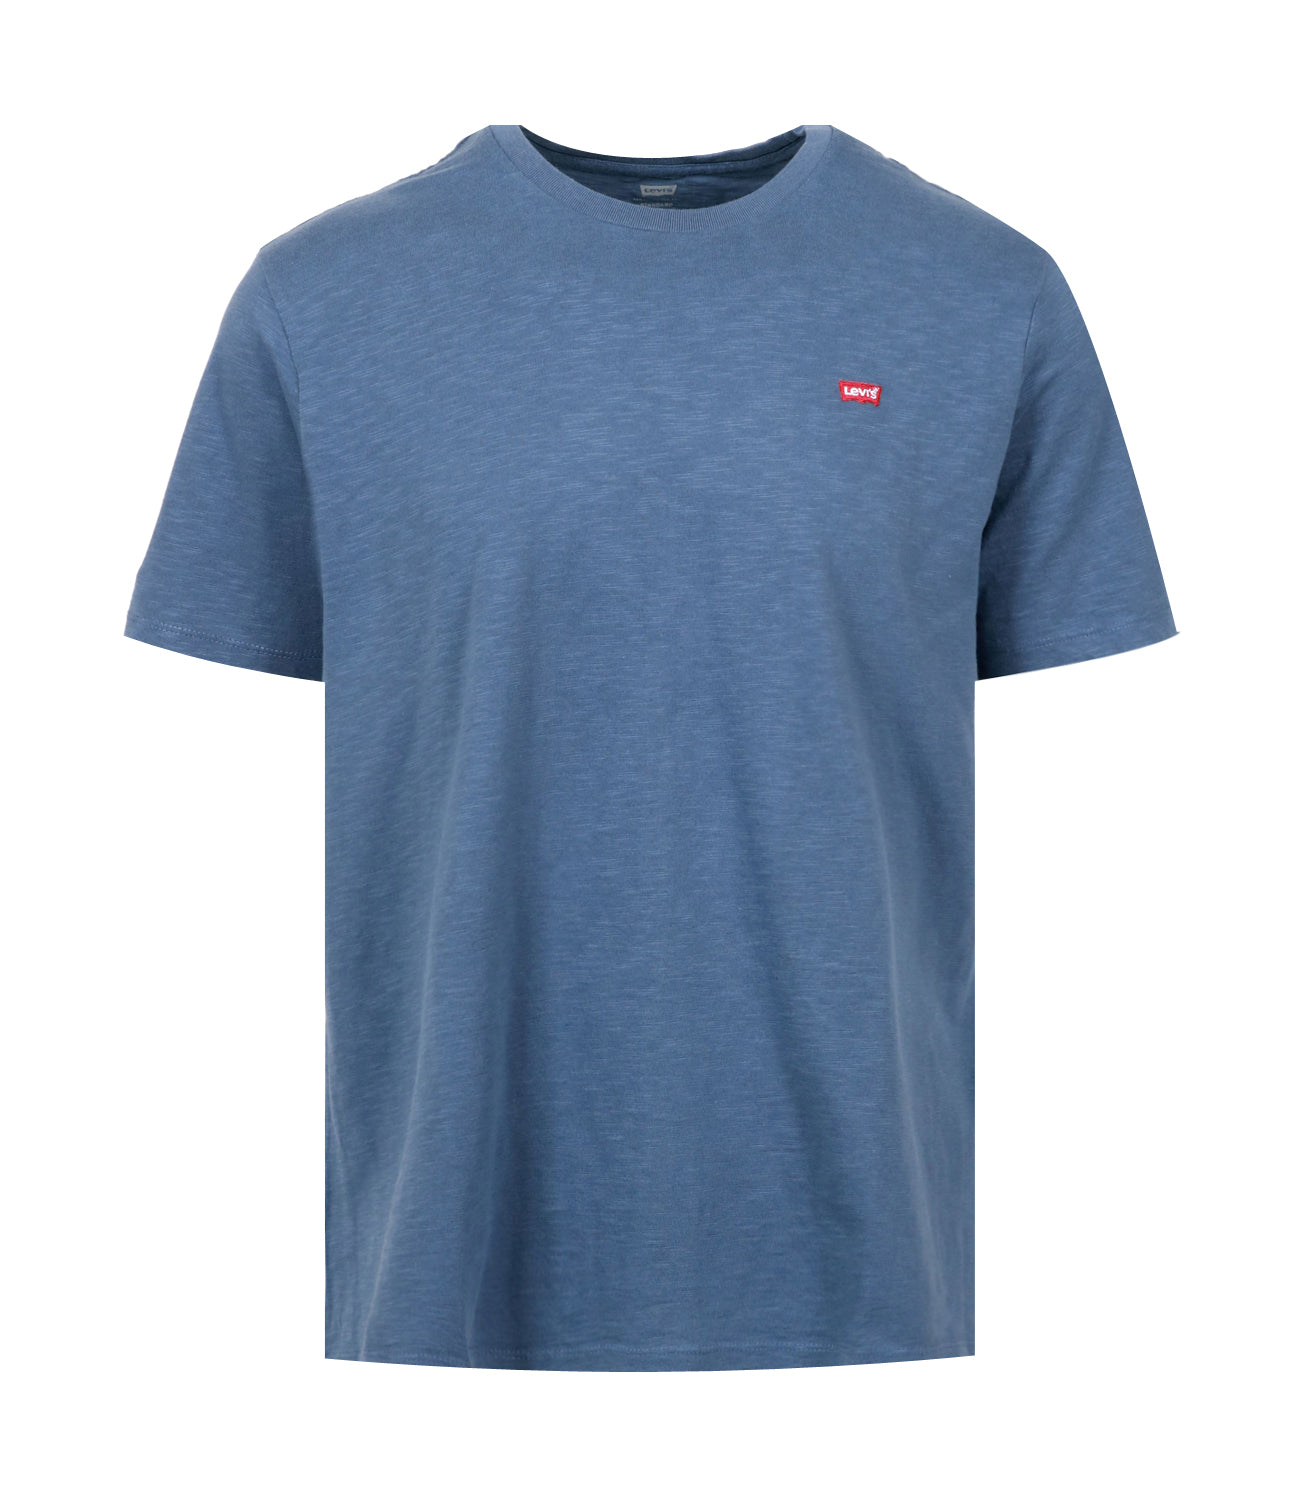 Levi's | T-Shirt Indaco